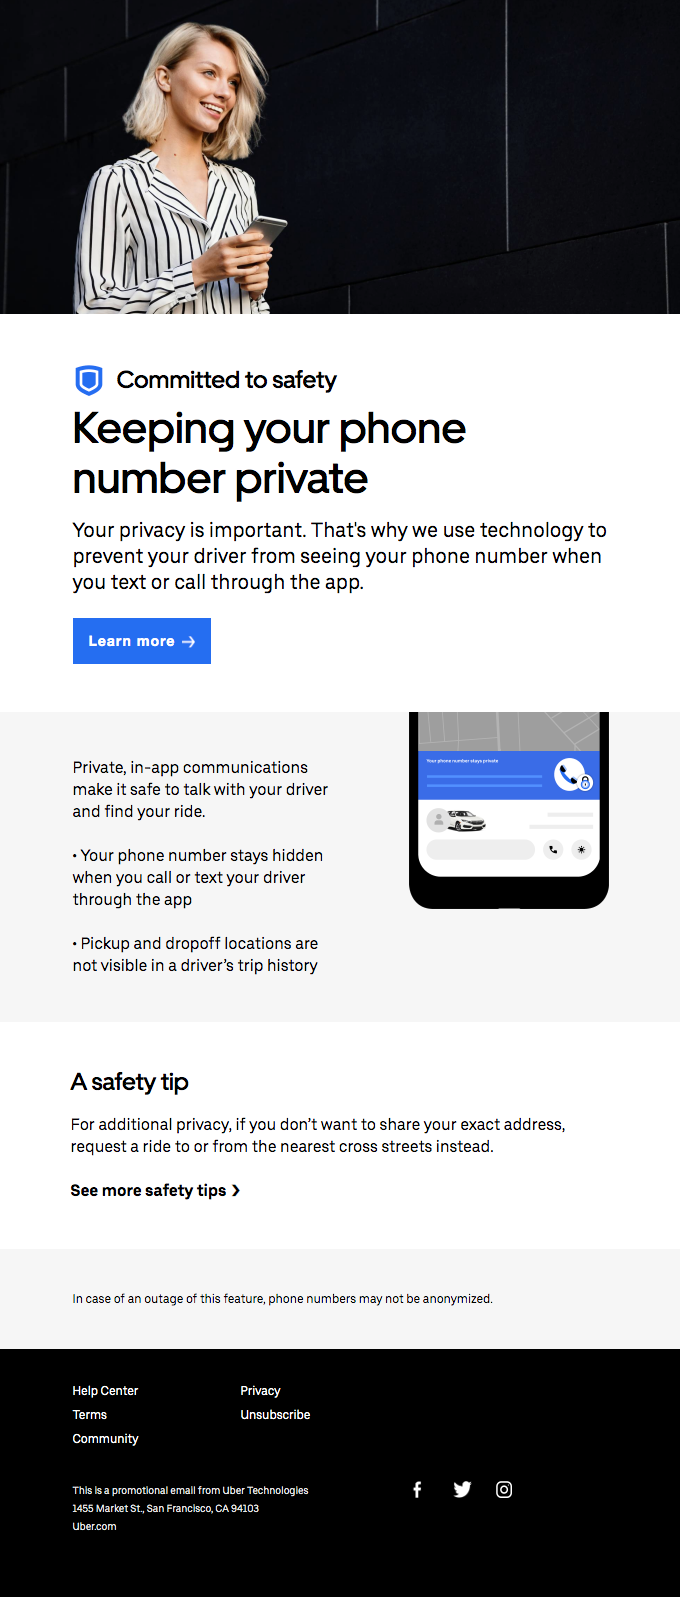 Your phone number stays hidden in the app